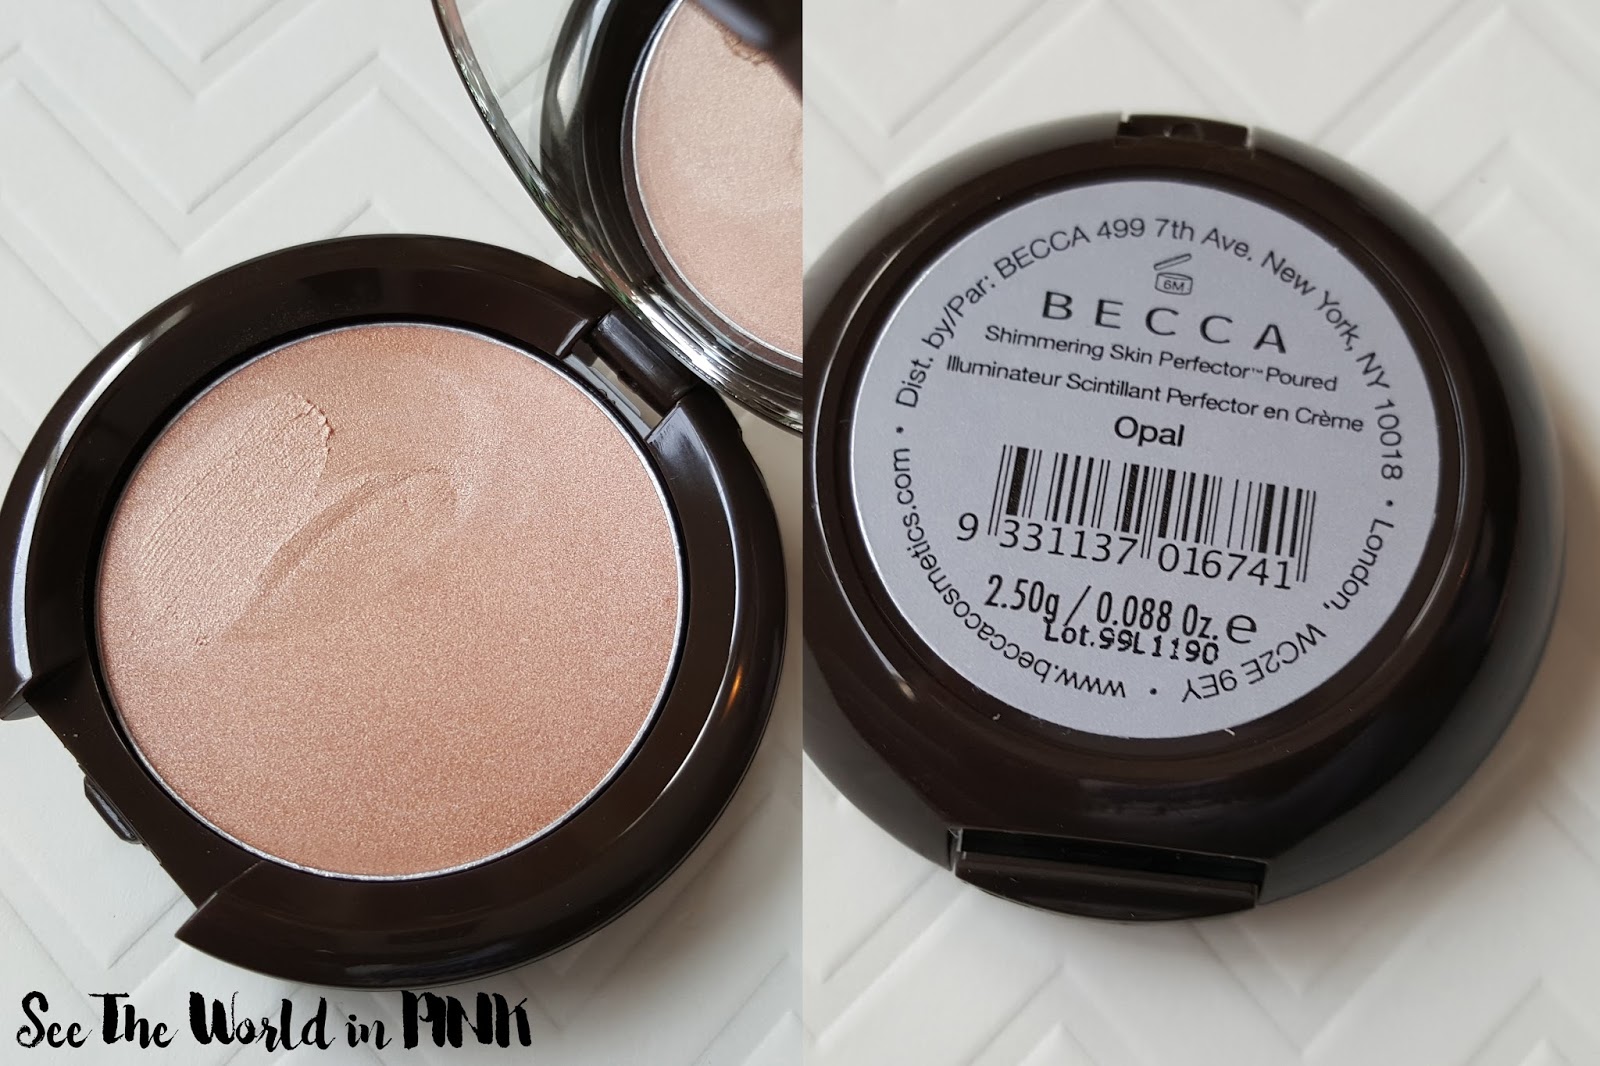 Becca Highlighter Comparison and Reviews - "Shimmering Skin Perfector" Pressed vs. Poured vs. Liquid 